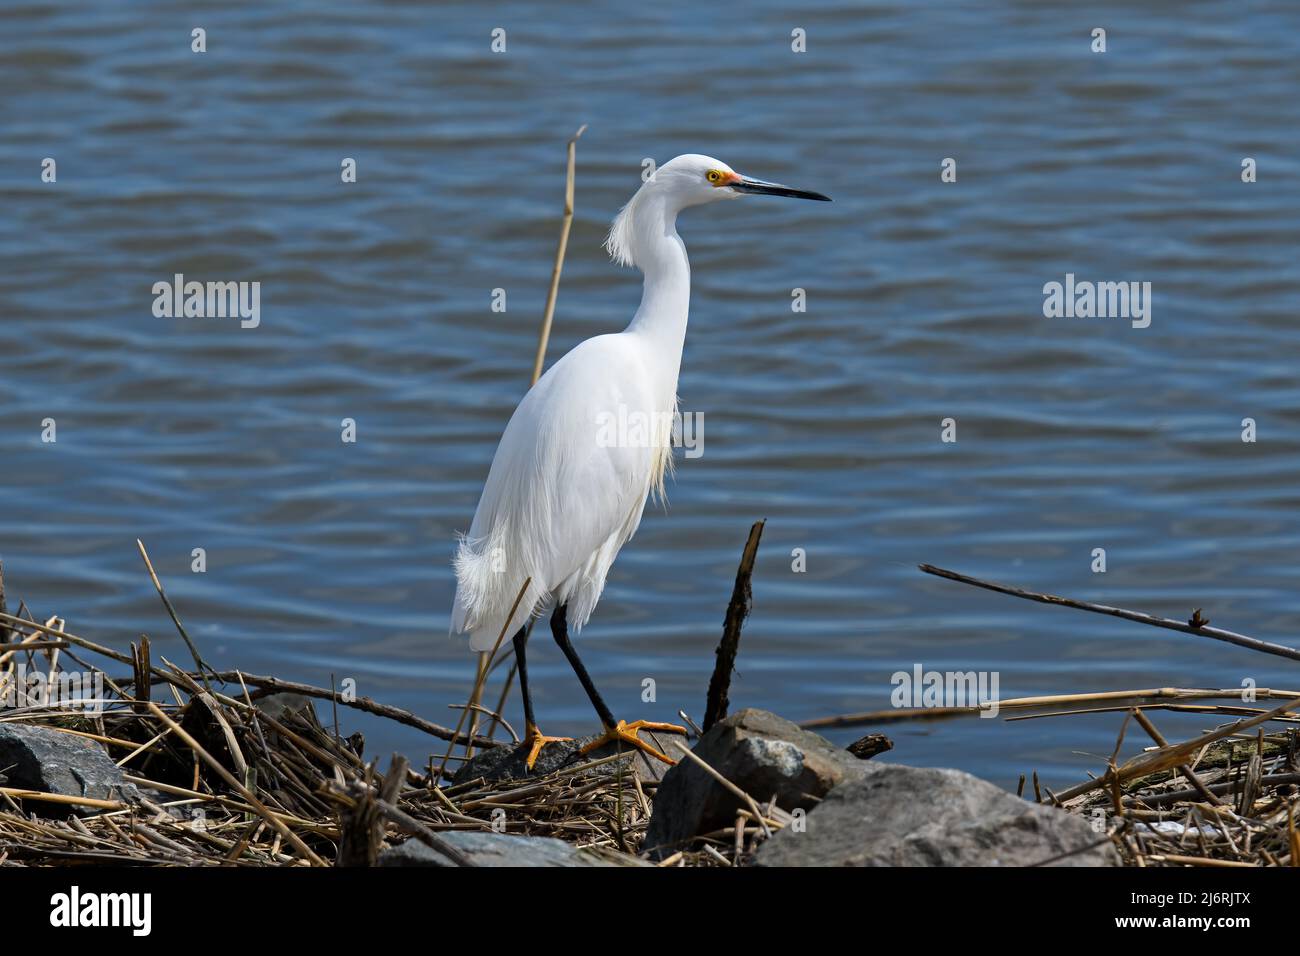 Snowy egret in an estuary. It is a small white heron also known as a little egret or aigrette. The bird is all white with a black bill, black legs Stock Photo